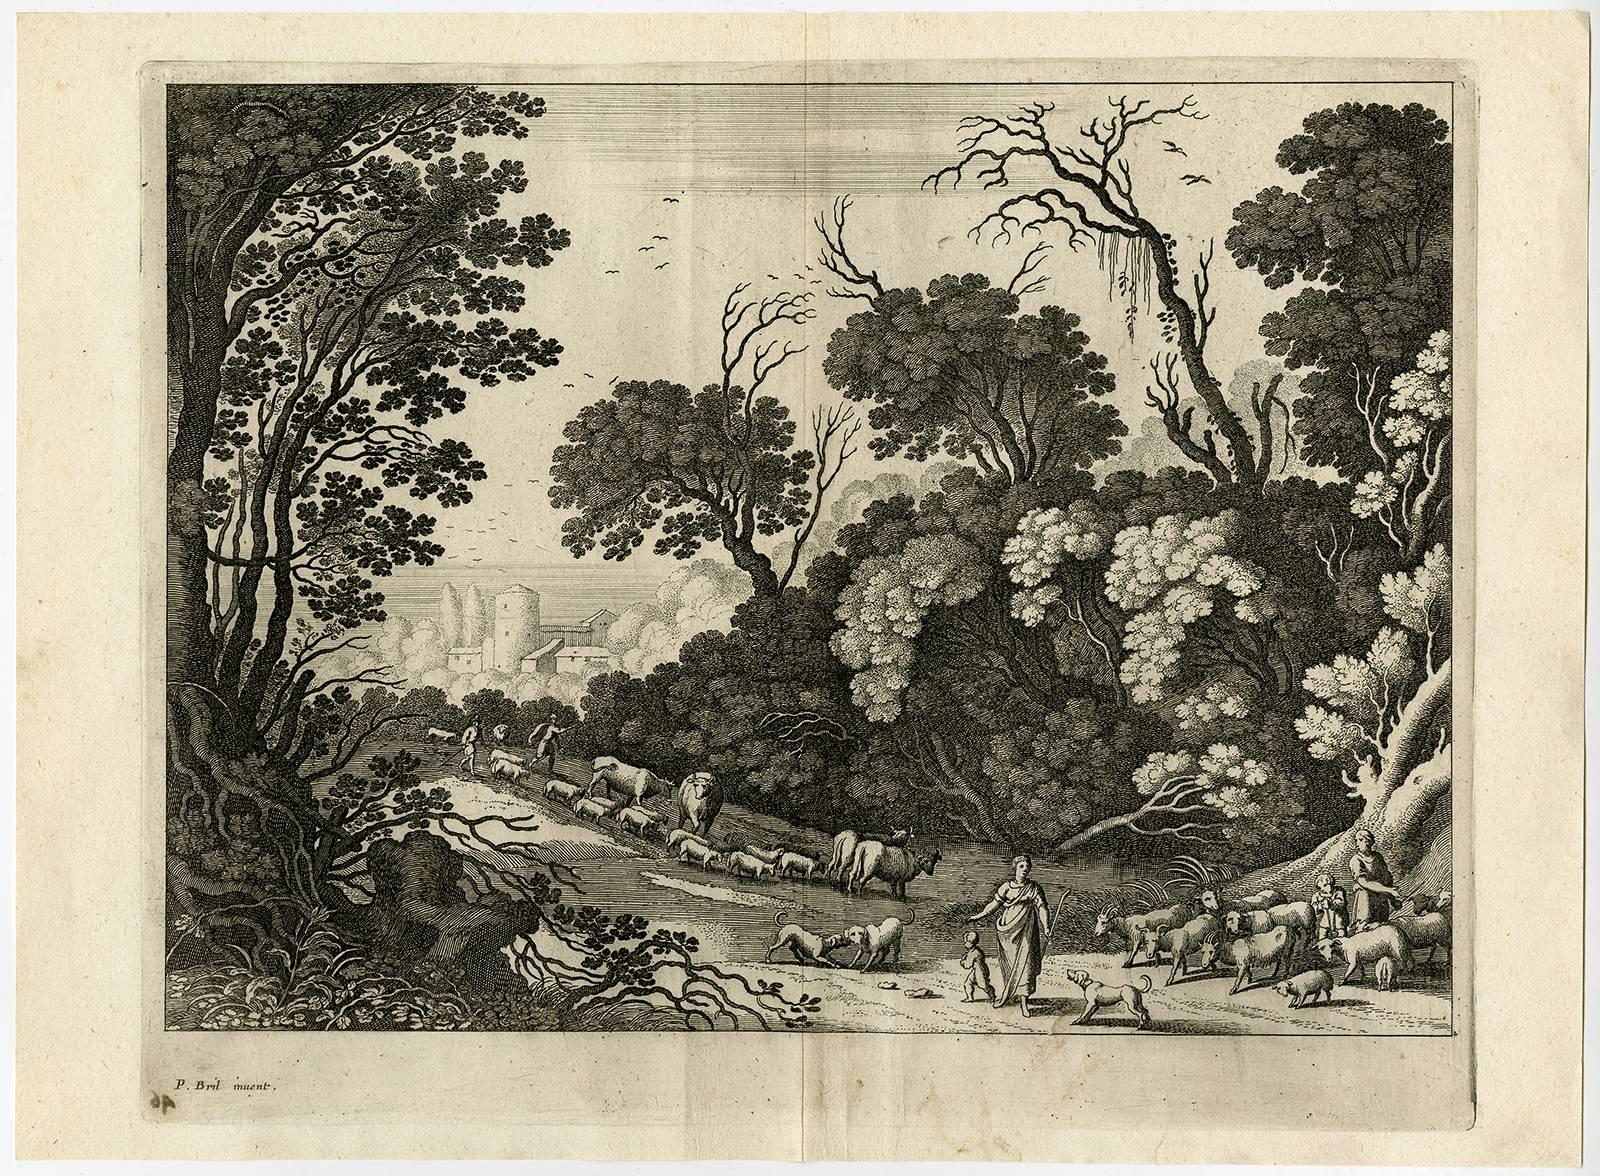 Nicolas Perelle Landscape Print - Untitled - A herd of cows and sheep fording a stream in a forest.